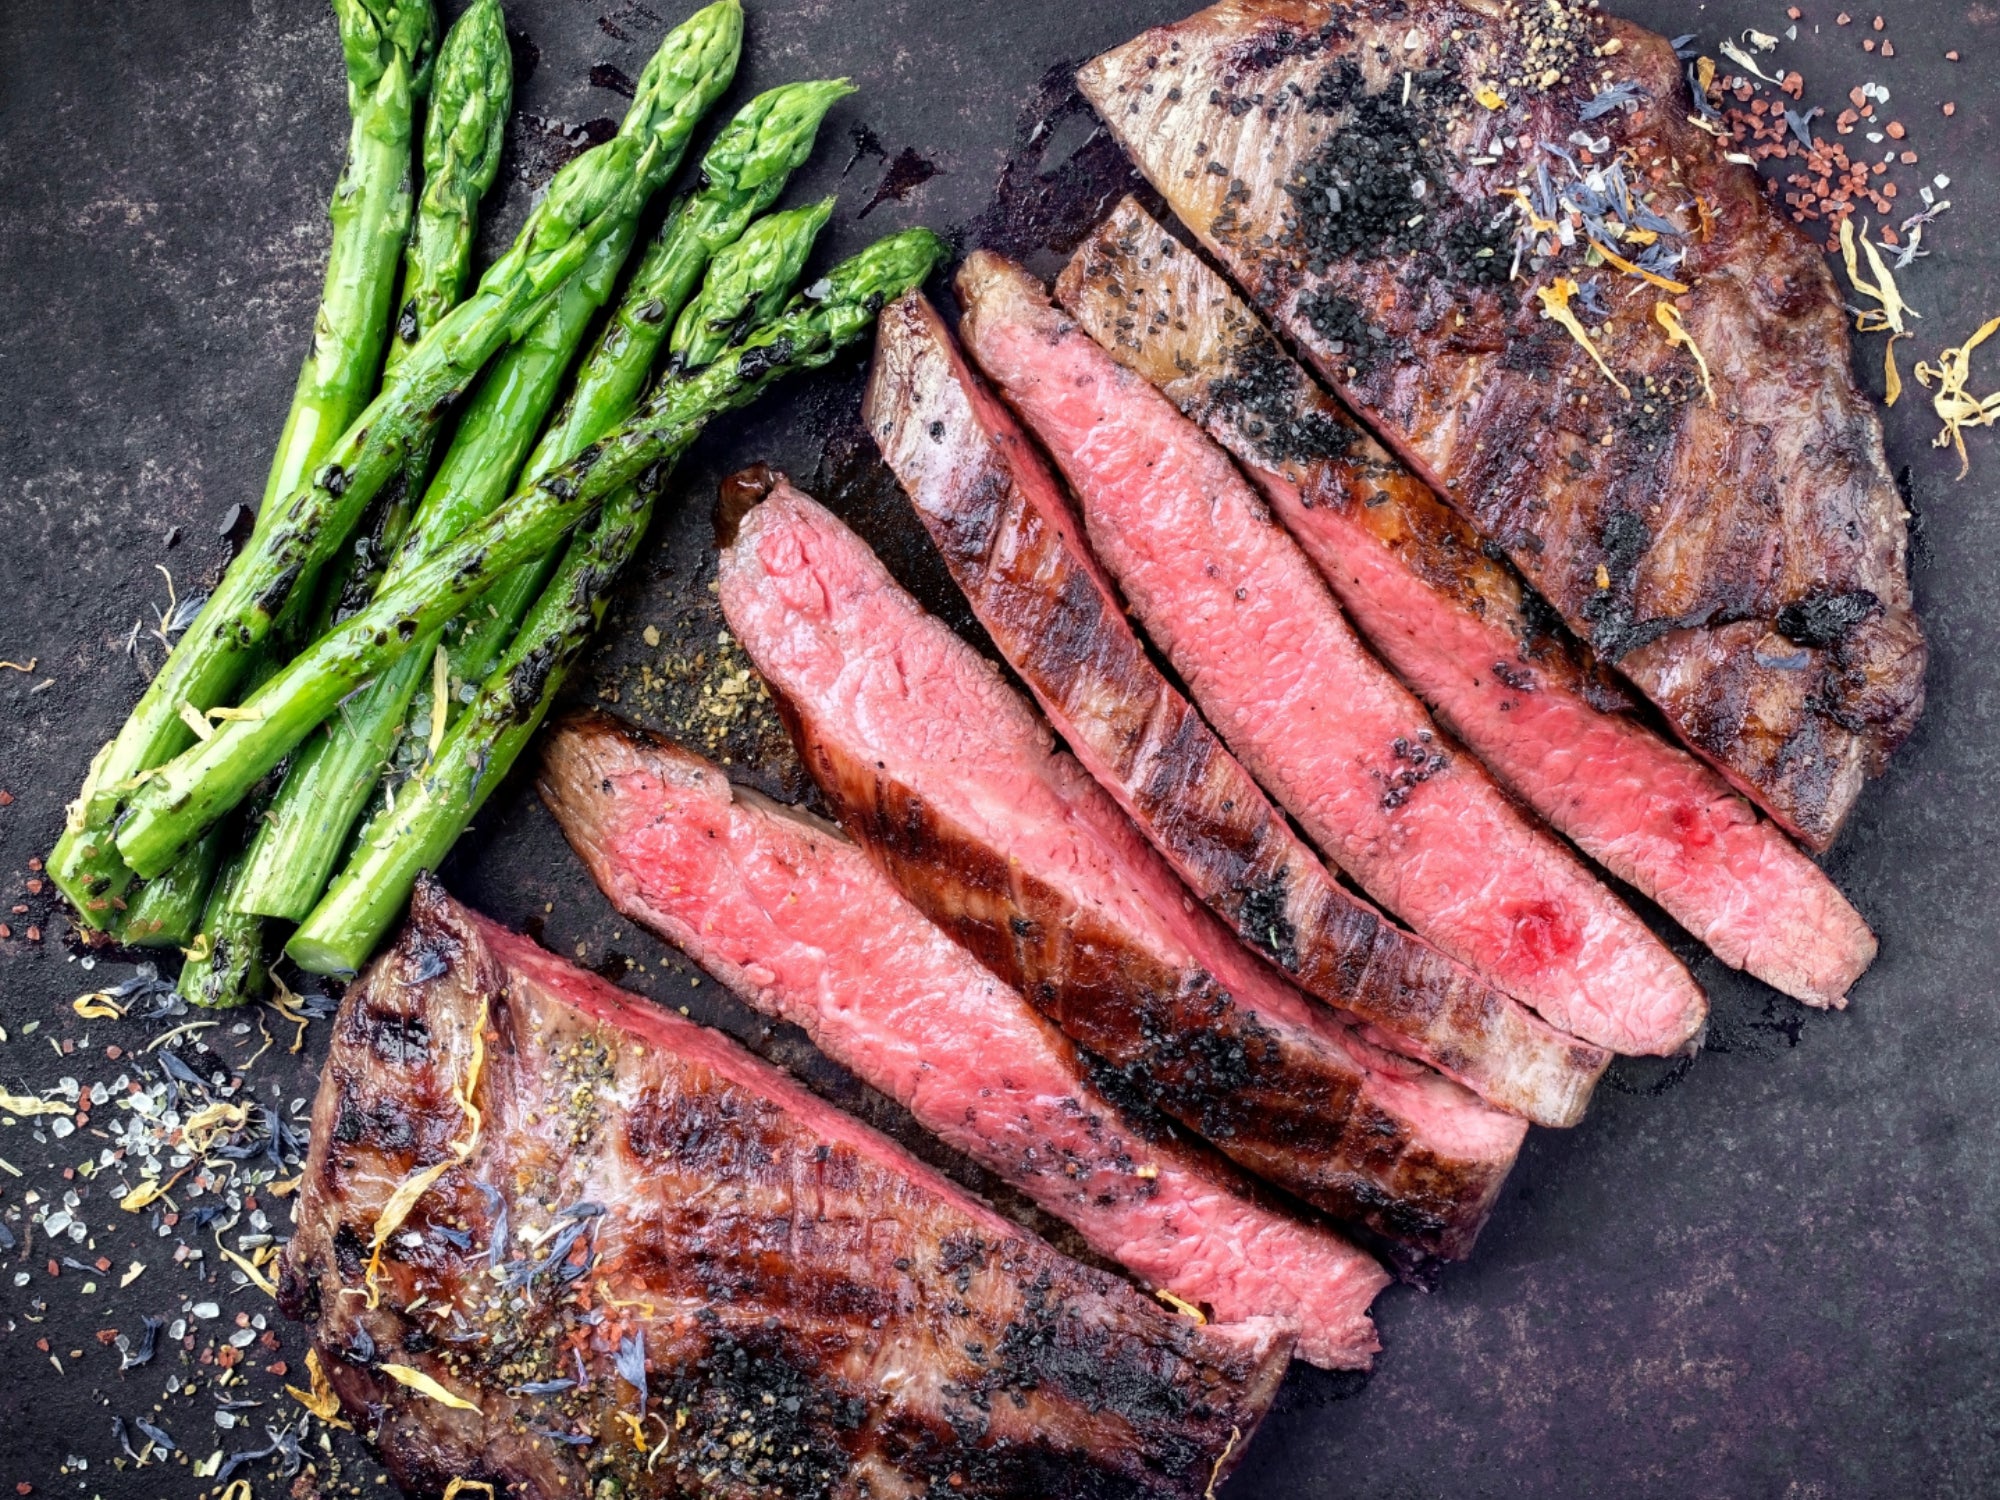 Best Grilled Flank Steak - How to Grill Flank Steak